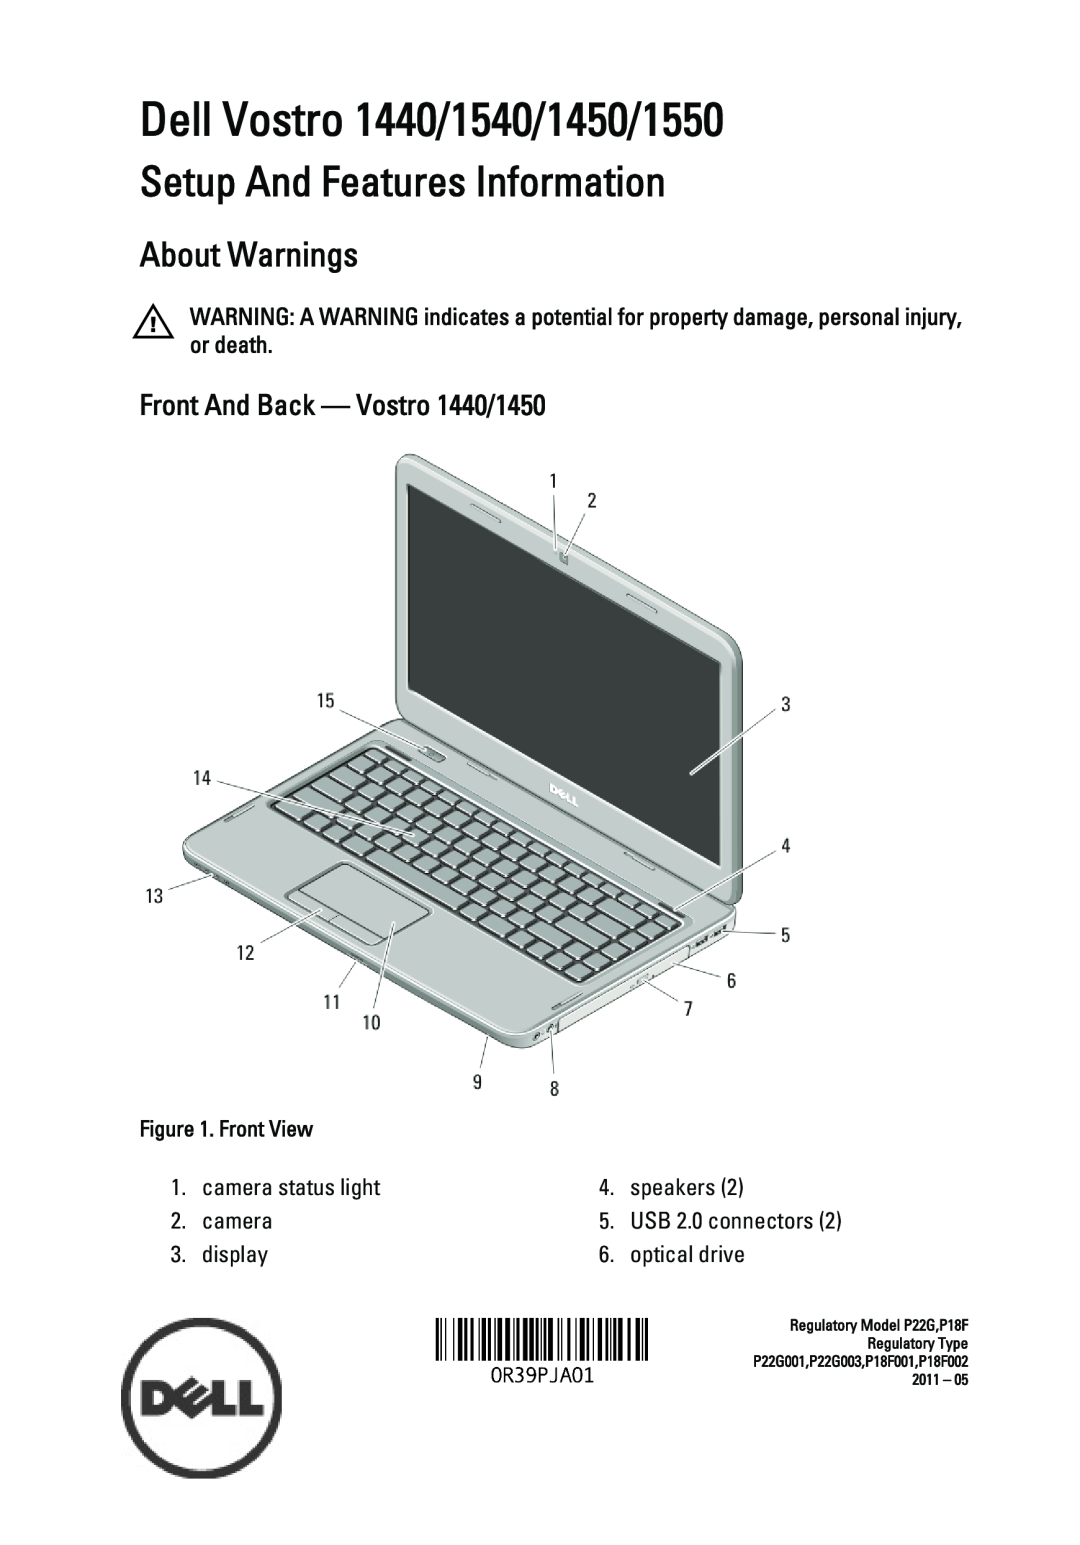 Dell manual Front And Back - Vostro 1440/1450, Dell Vostro 1440/1540/1450/1550, Setup And Features Information 